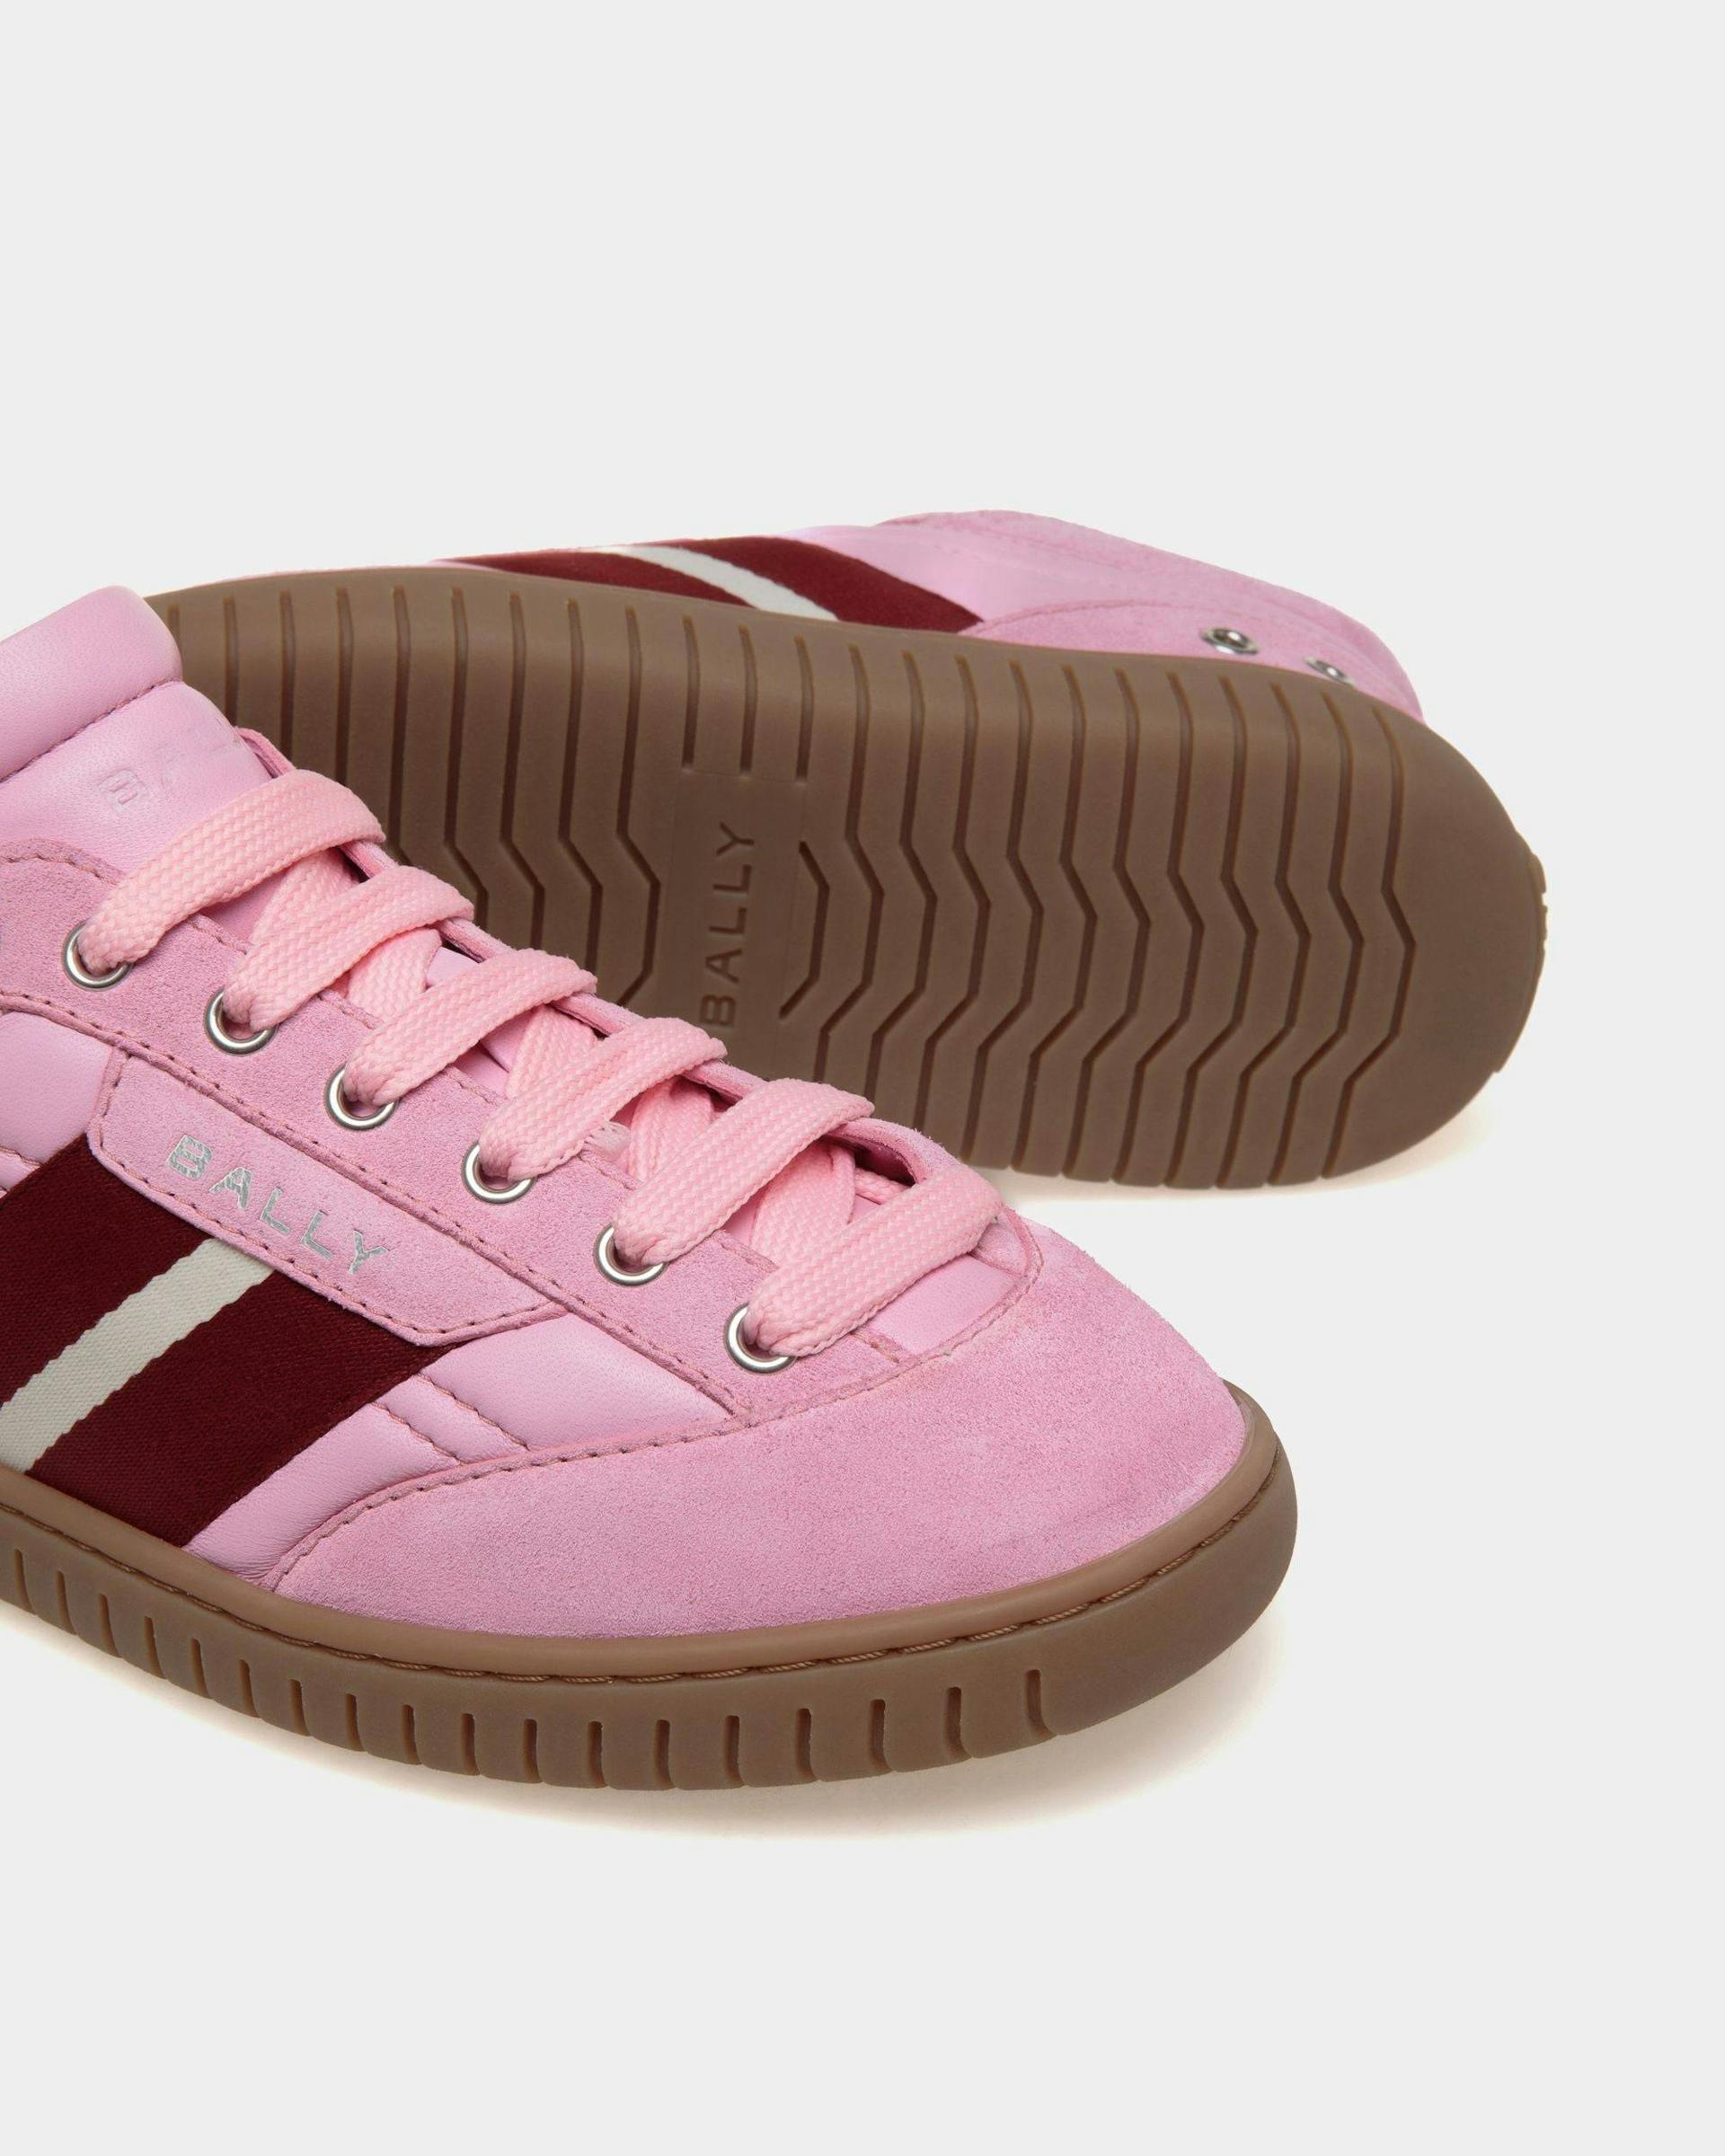 Women's Player Sneaker in Pink Leather and Suede | Bally | Still Life Below